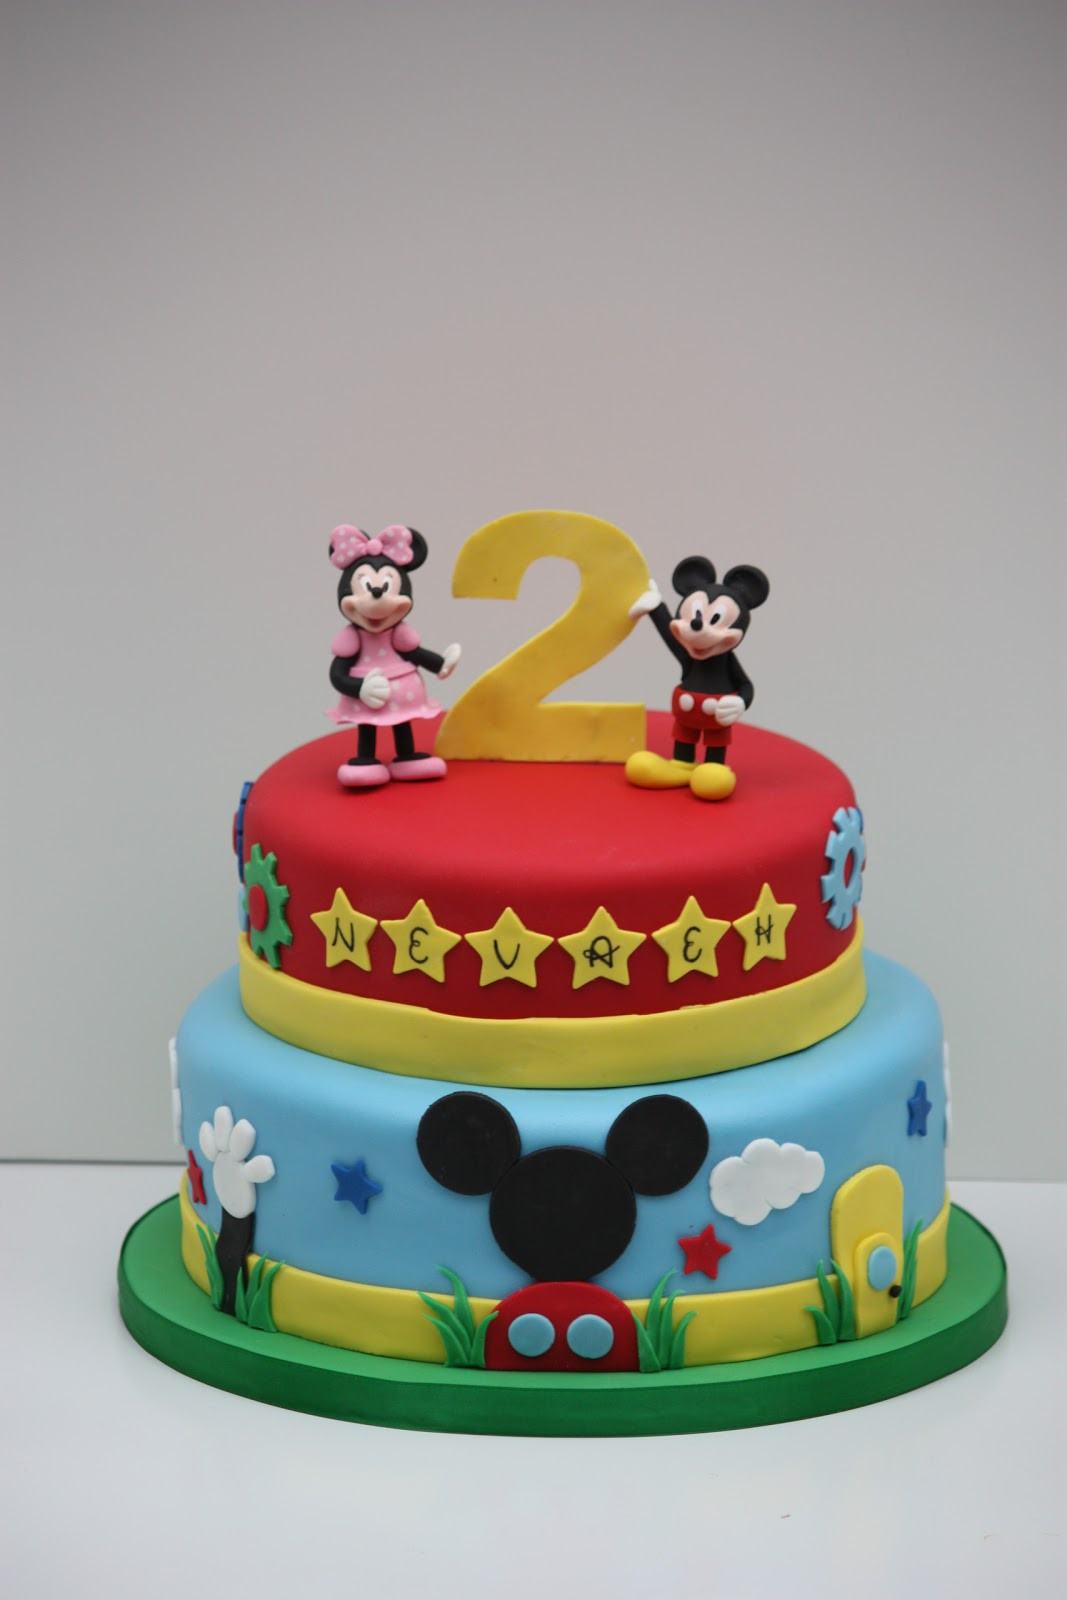 Mickey Mouse Clubhouse Birthday Cakes
 Whimsical by Design Mickey Mouse Clubhouse Cake